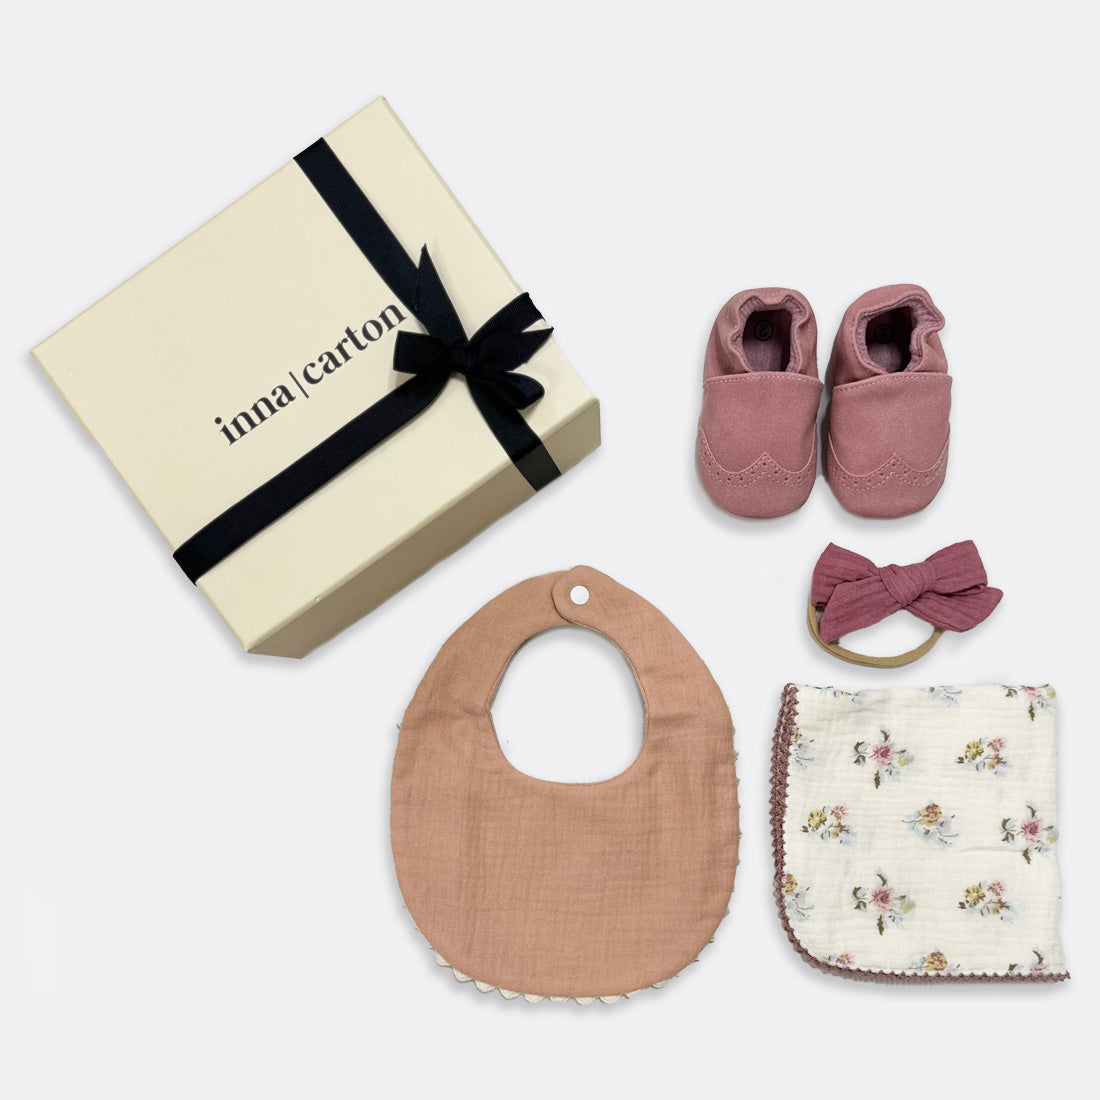 My Moccasin | Rose (from birth up to 12 months) Scallop Bib | Bois de Rose Double-sided Baby Headband- Pink Rose Cottage Chic Muslin Square, shop the best Christmas gift gifts for her for him from Inna carton online store dubai, UAE!